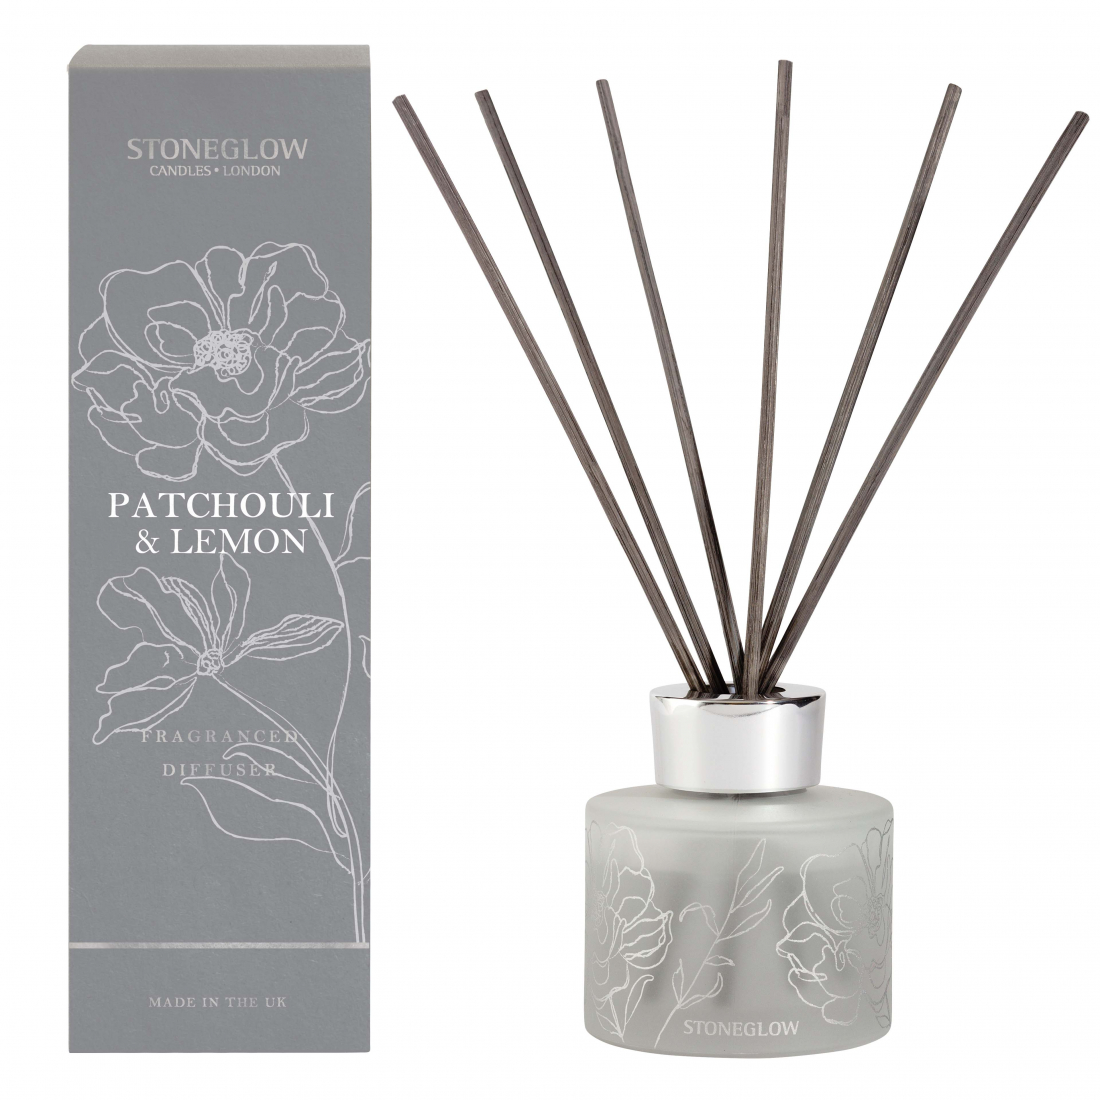 'Day Flower Patchouli & Lemon' Reed Diffuser - 120 ml